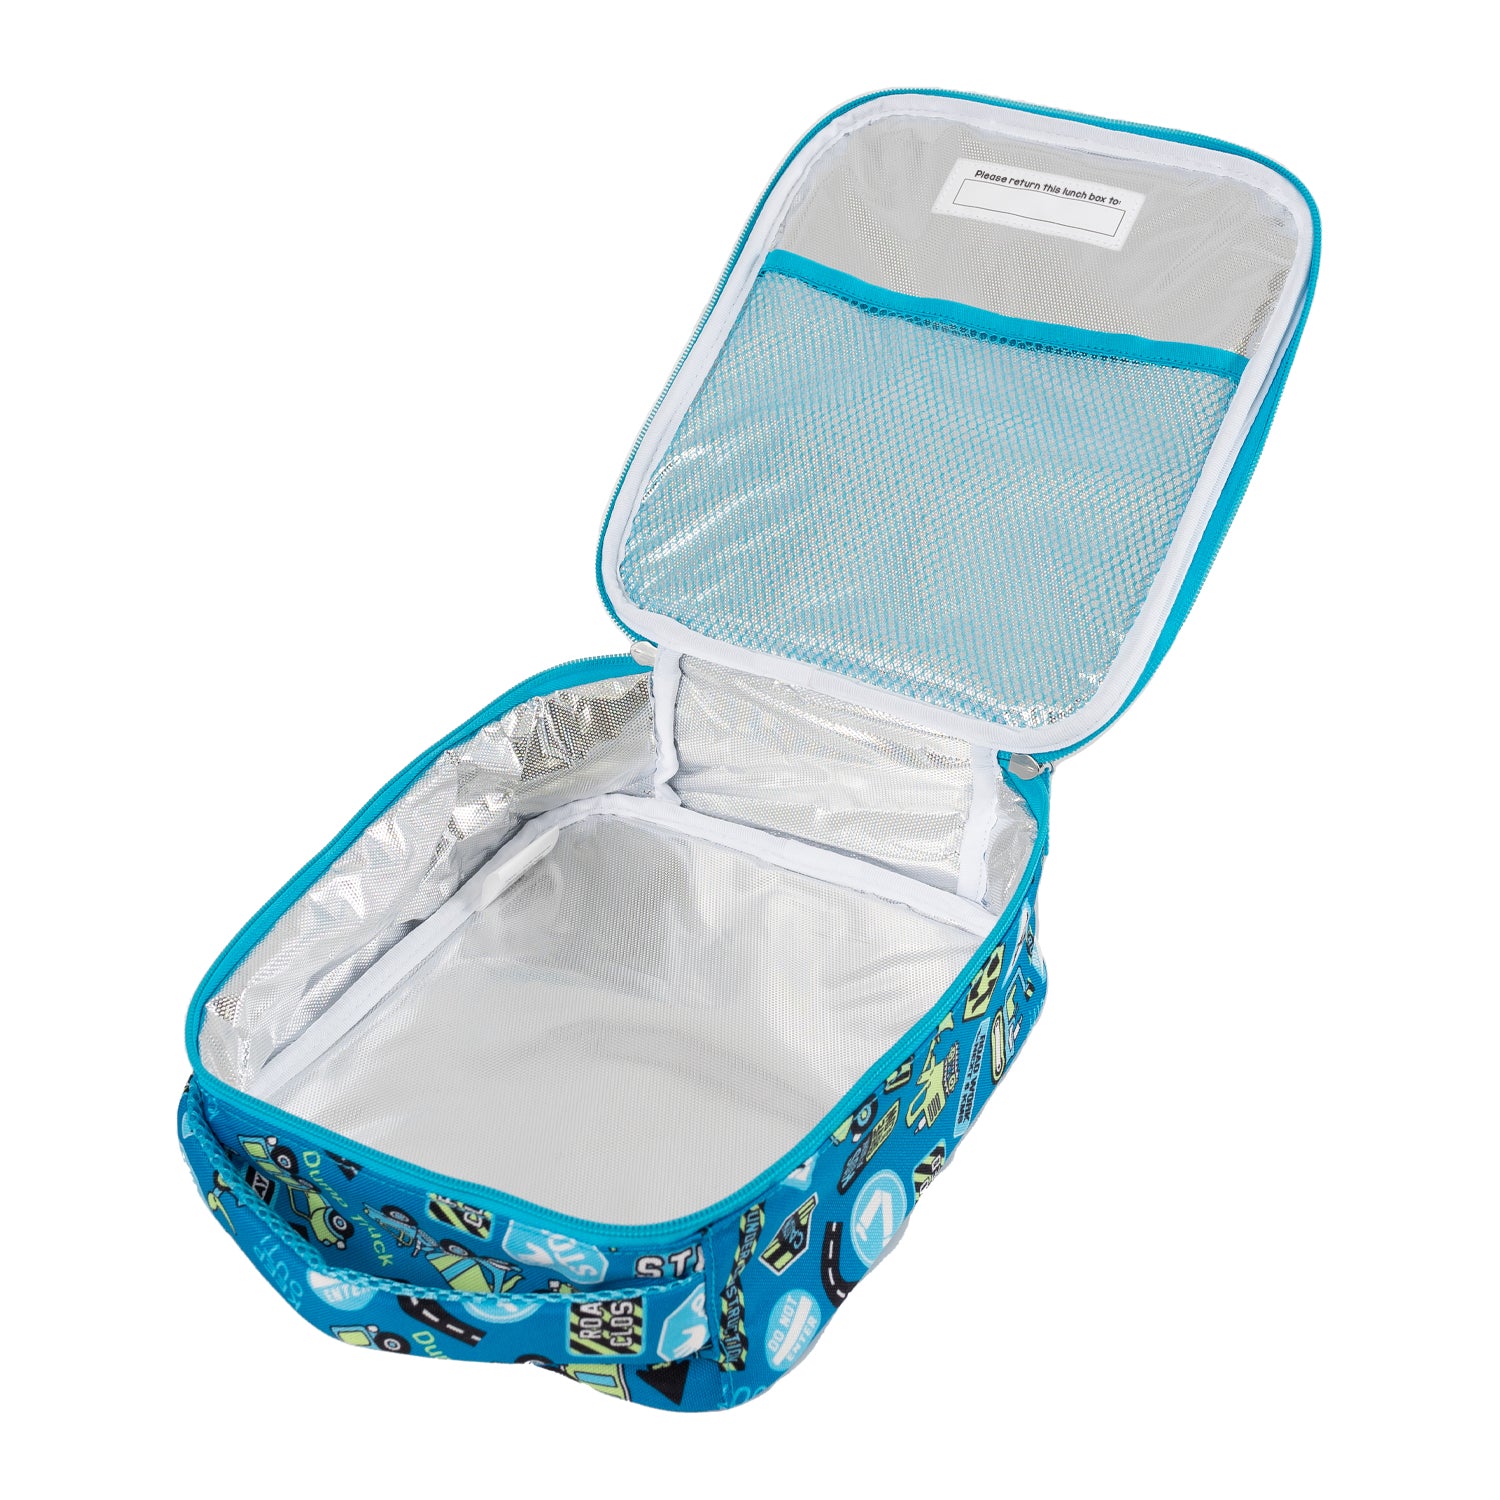 Construction Insulated Lunch Box